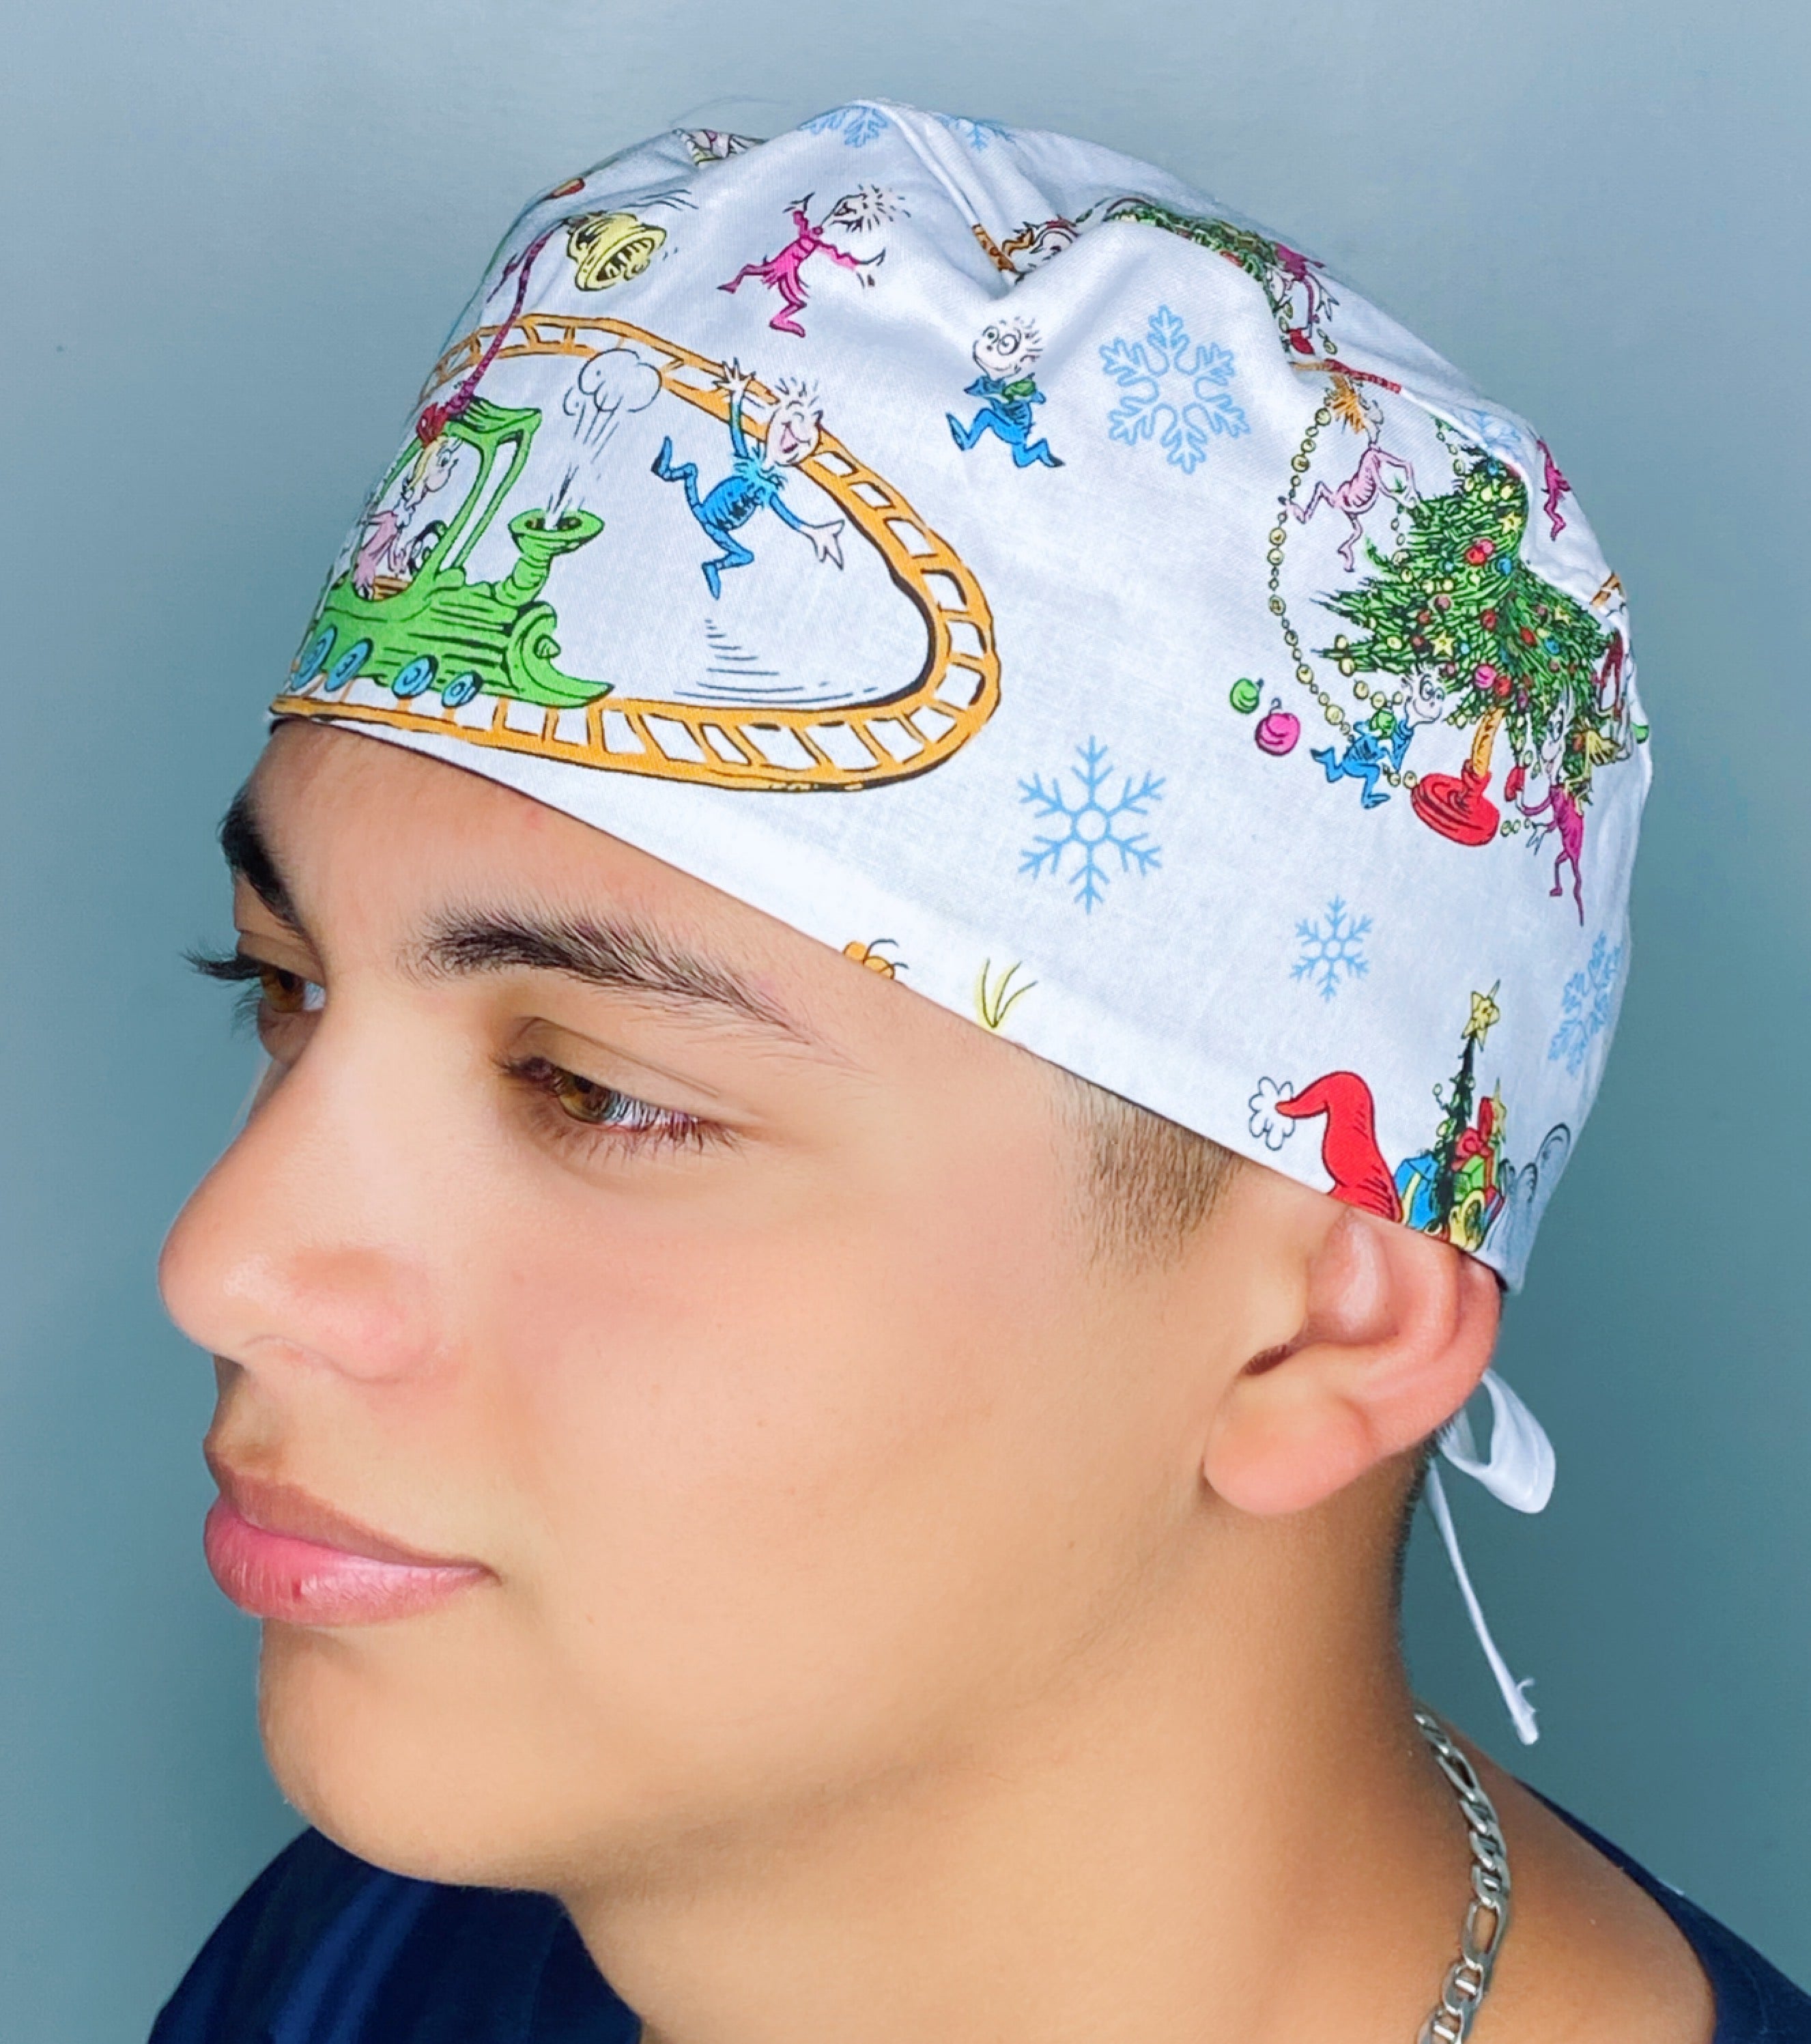 A Whoville Grinchmas Christmas/Winter themed Unisex Holiday Scrub Cap